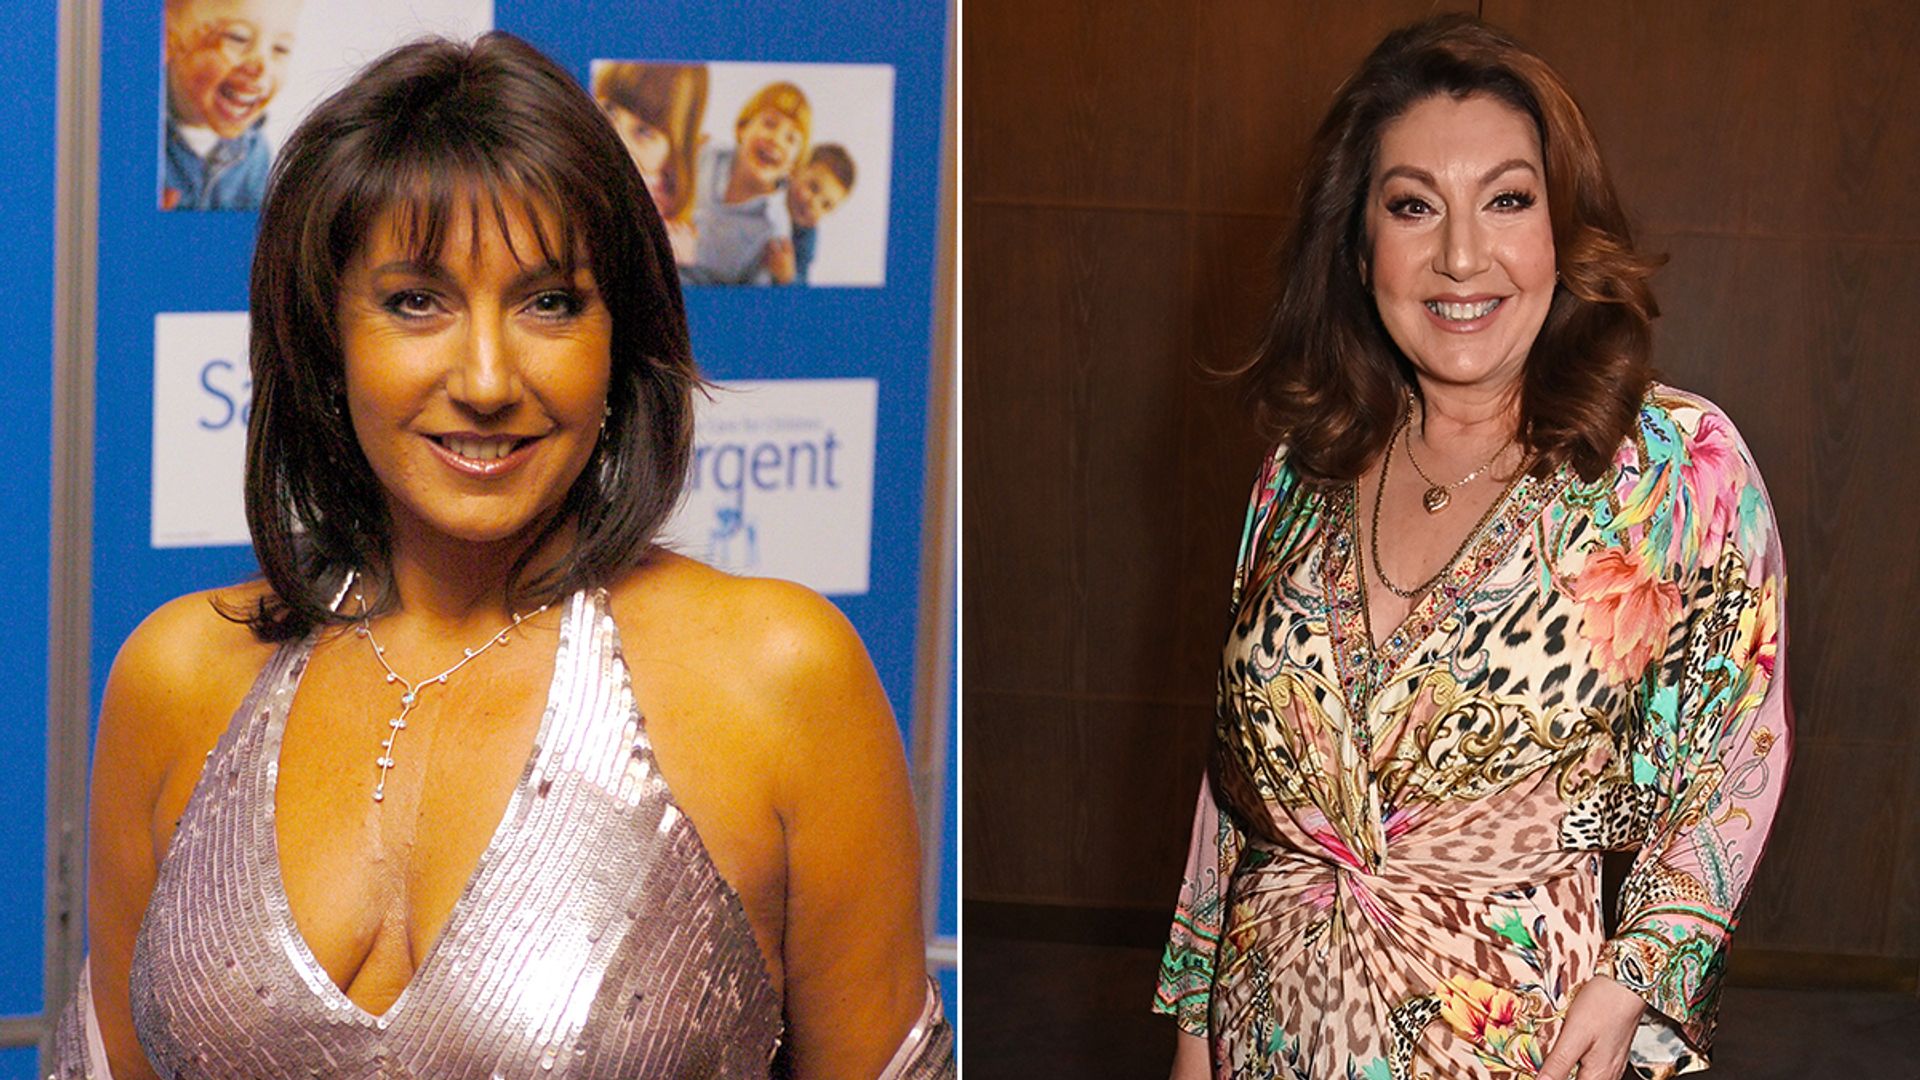 Split image of Jane McDonald in a silver dress and one of her in an animal-print dress